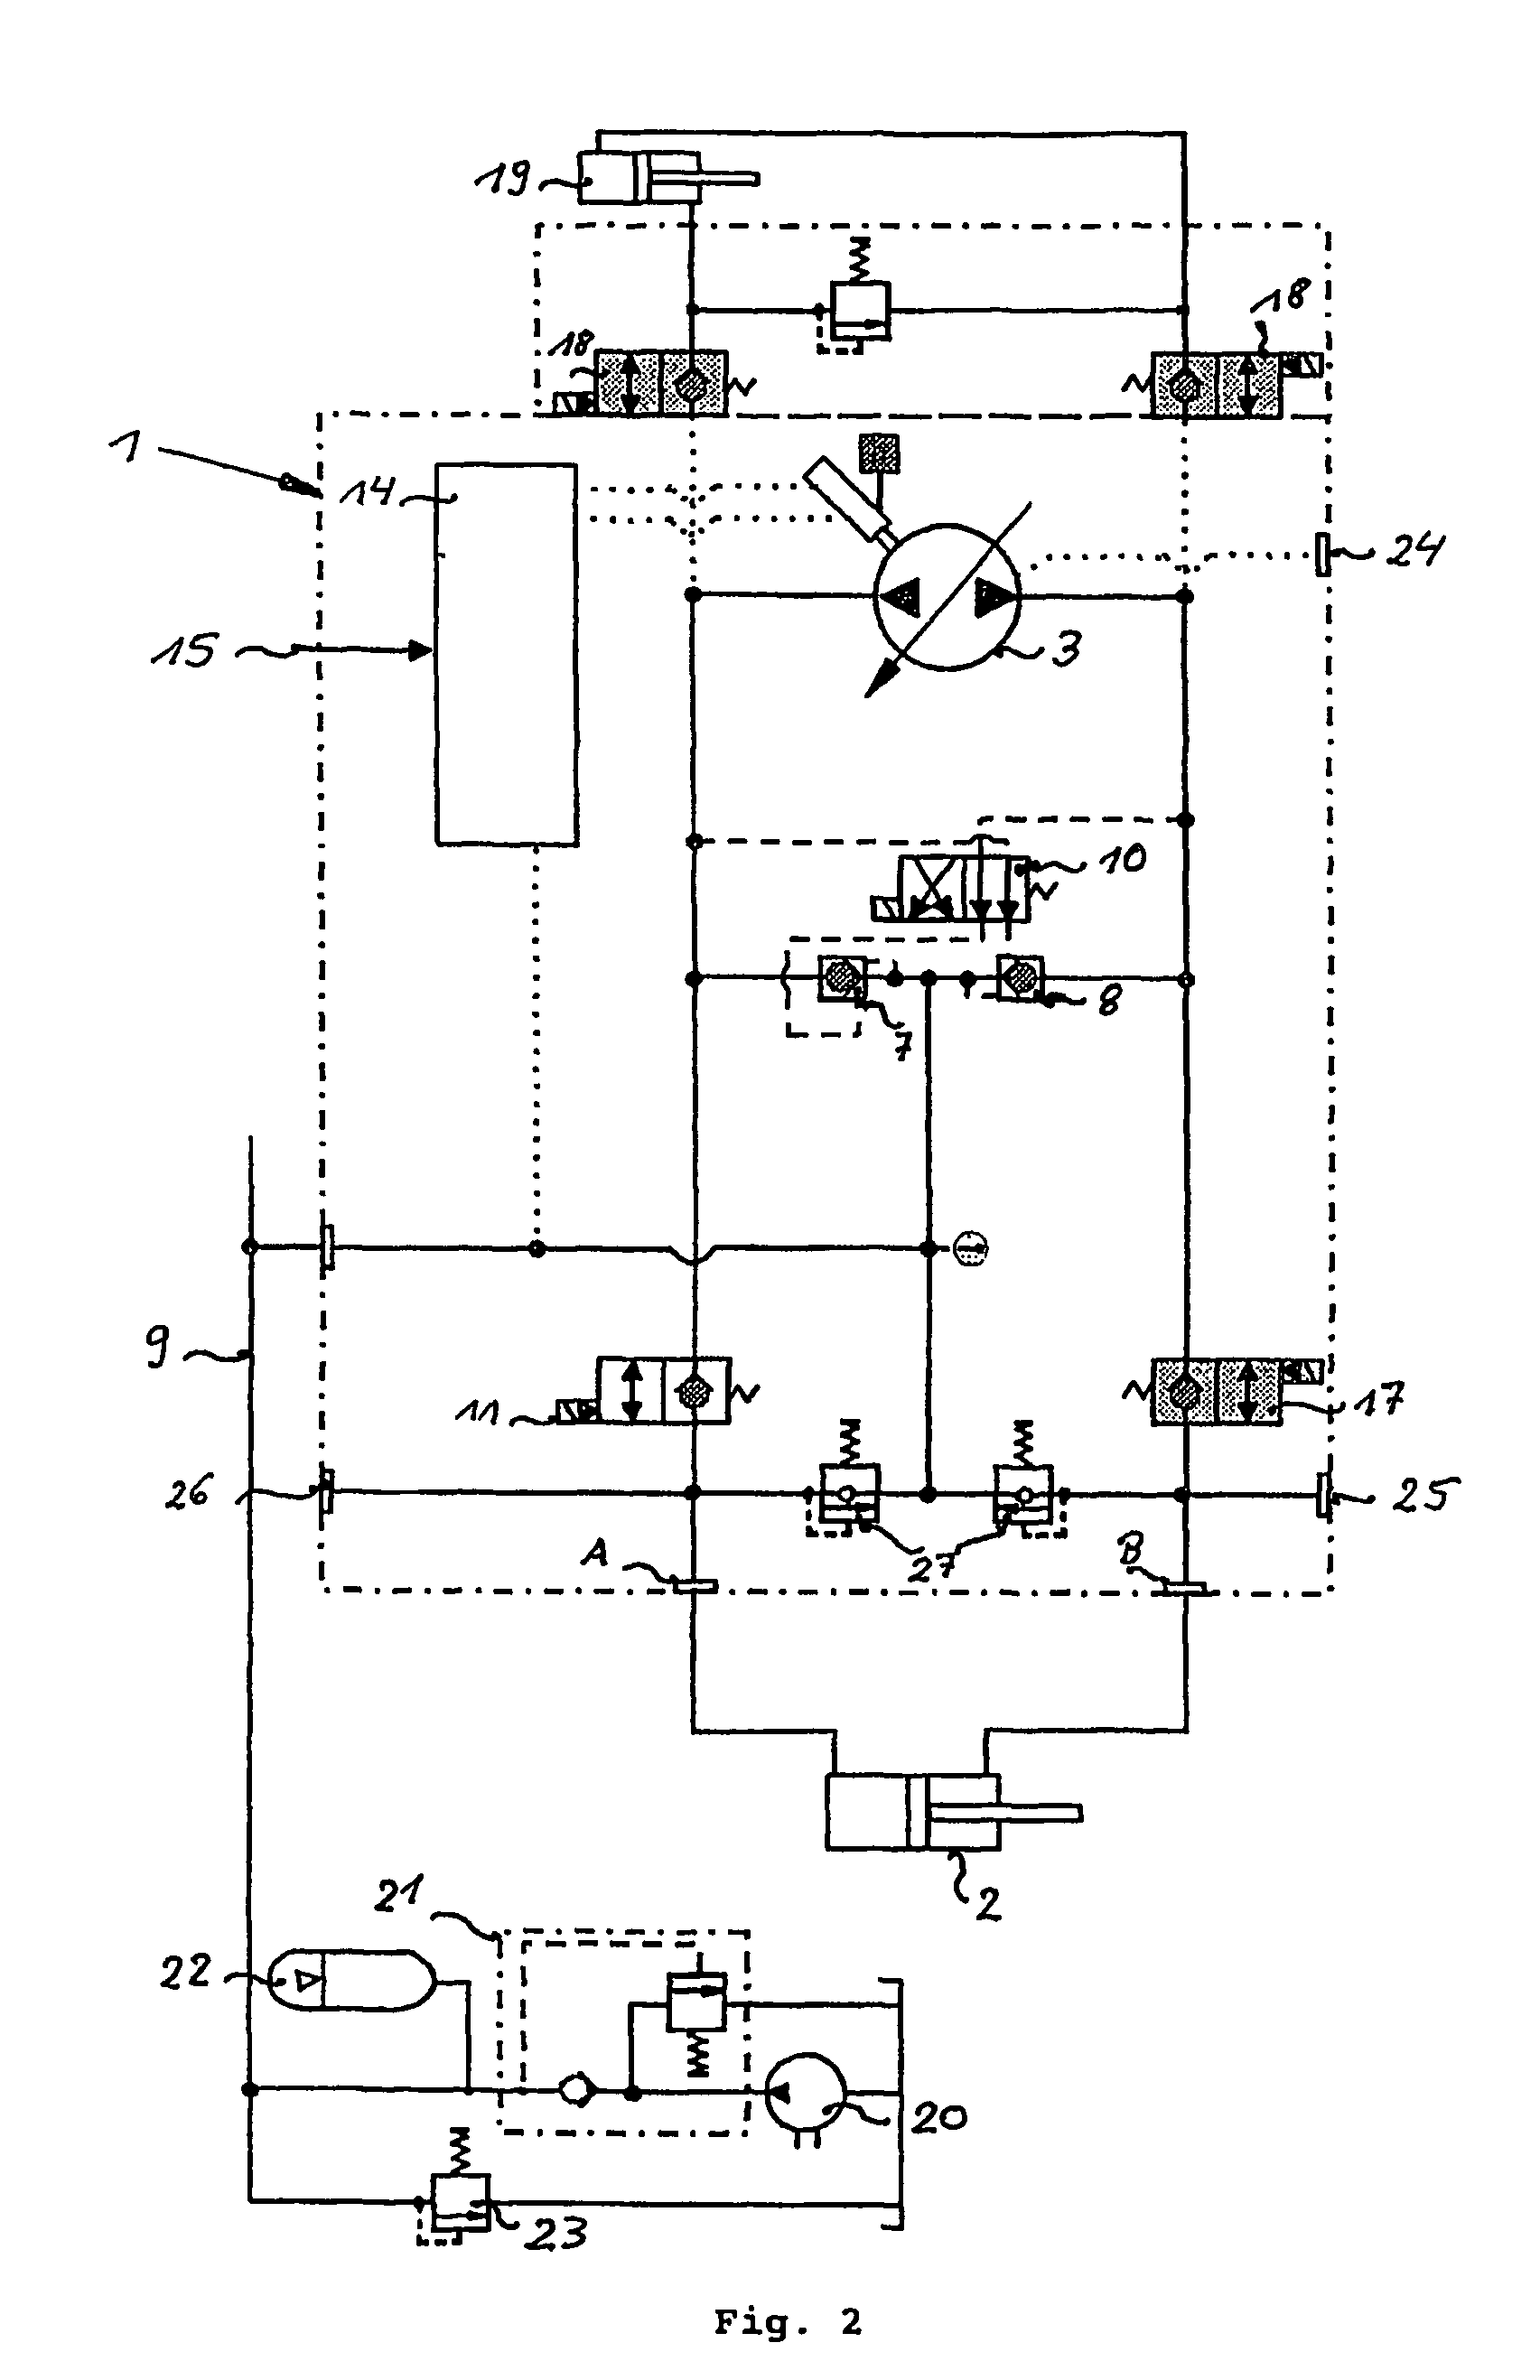 Hydraulic system for linear drives controlled by a displacer element